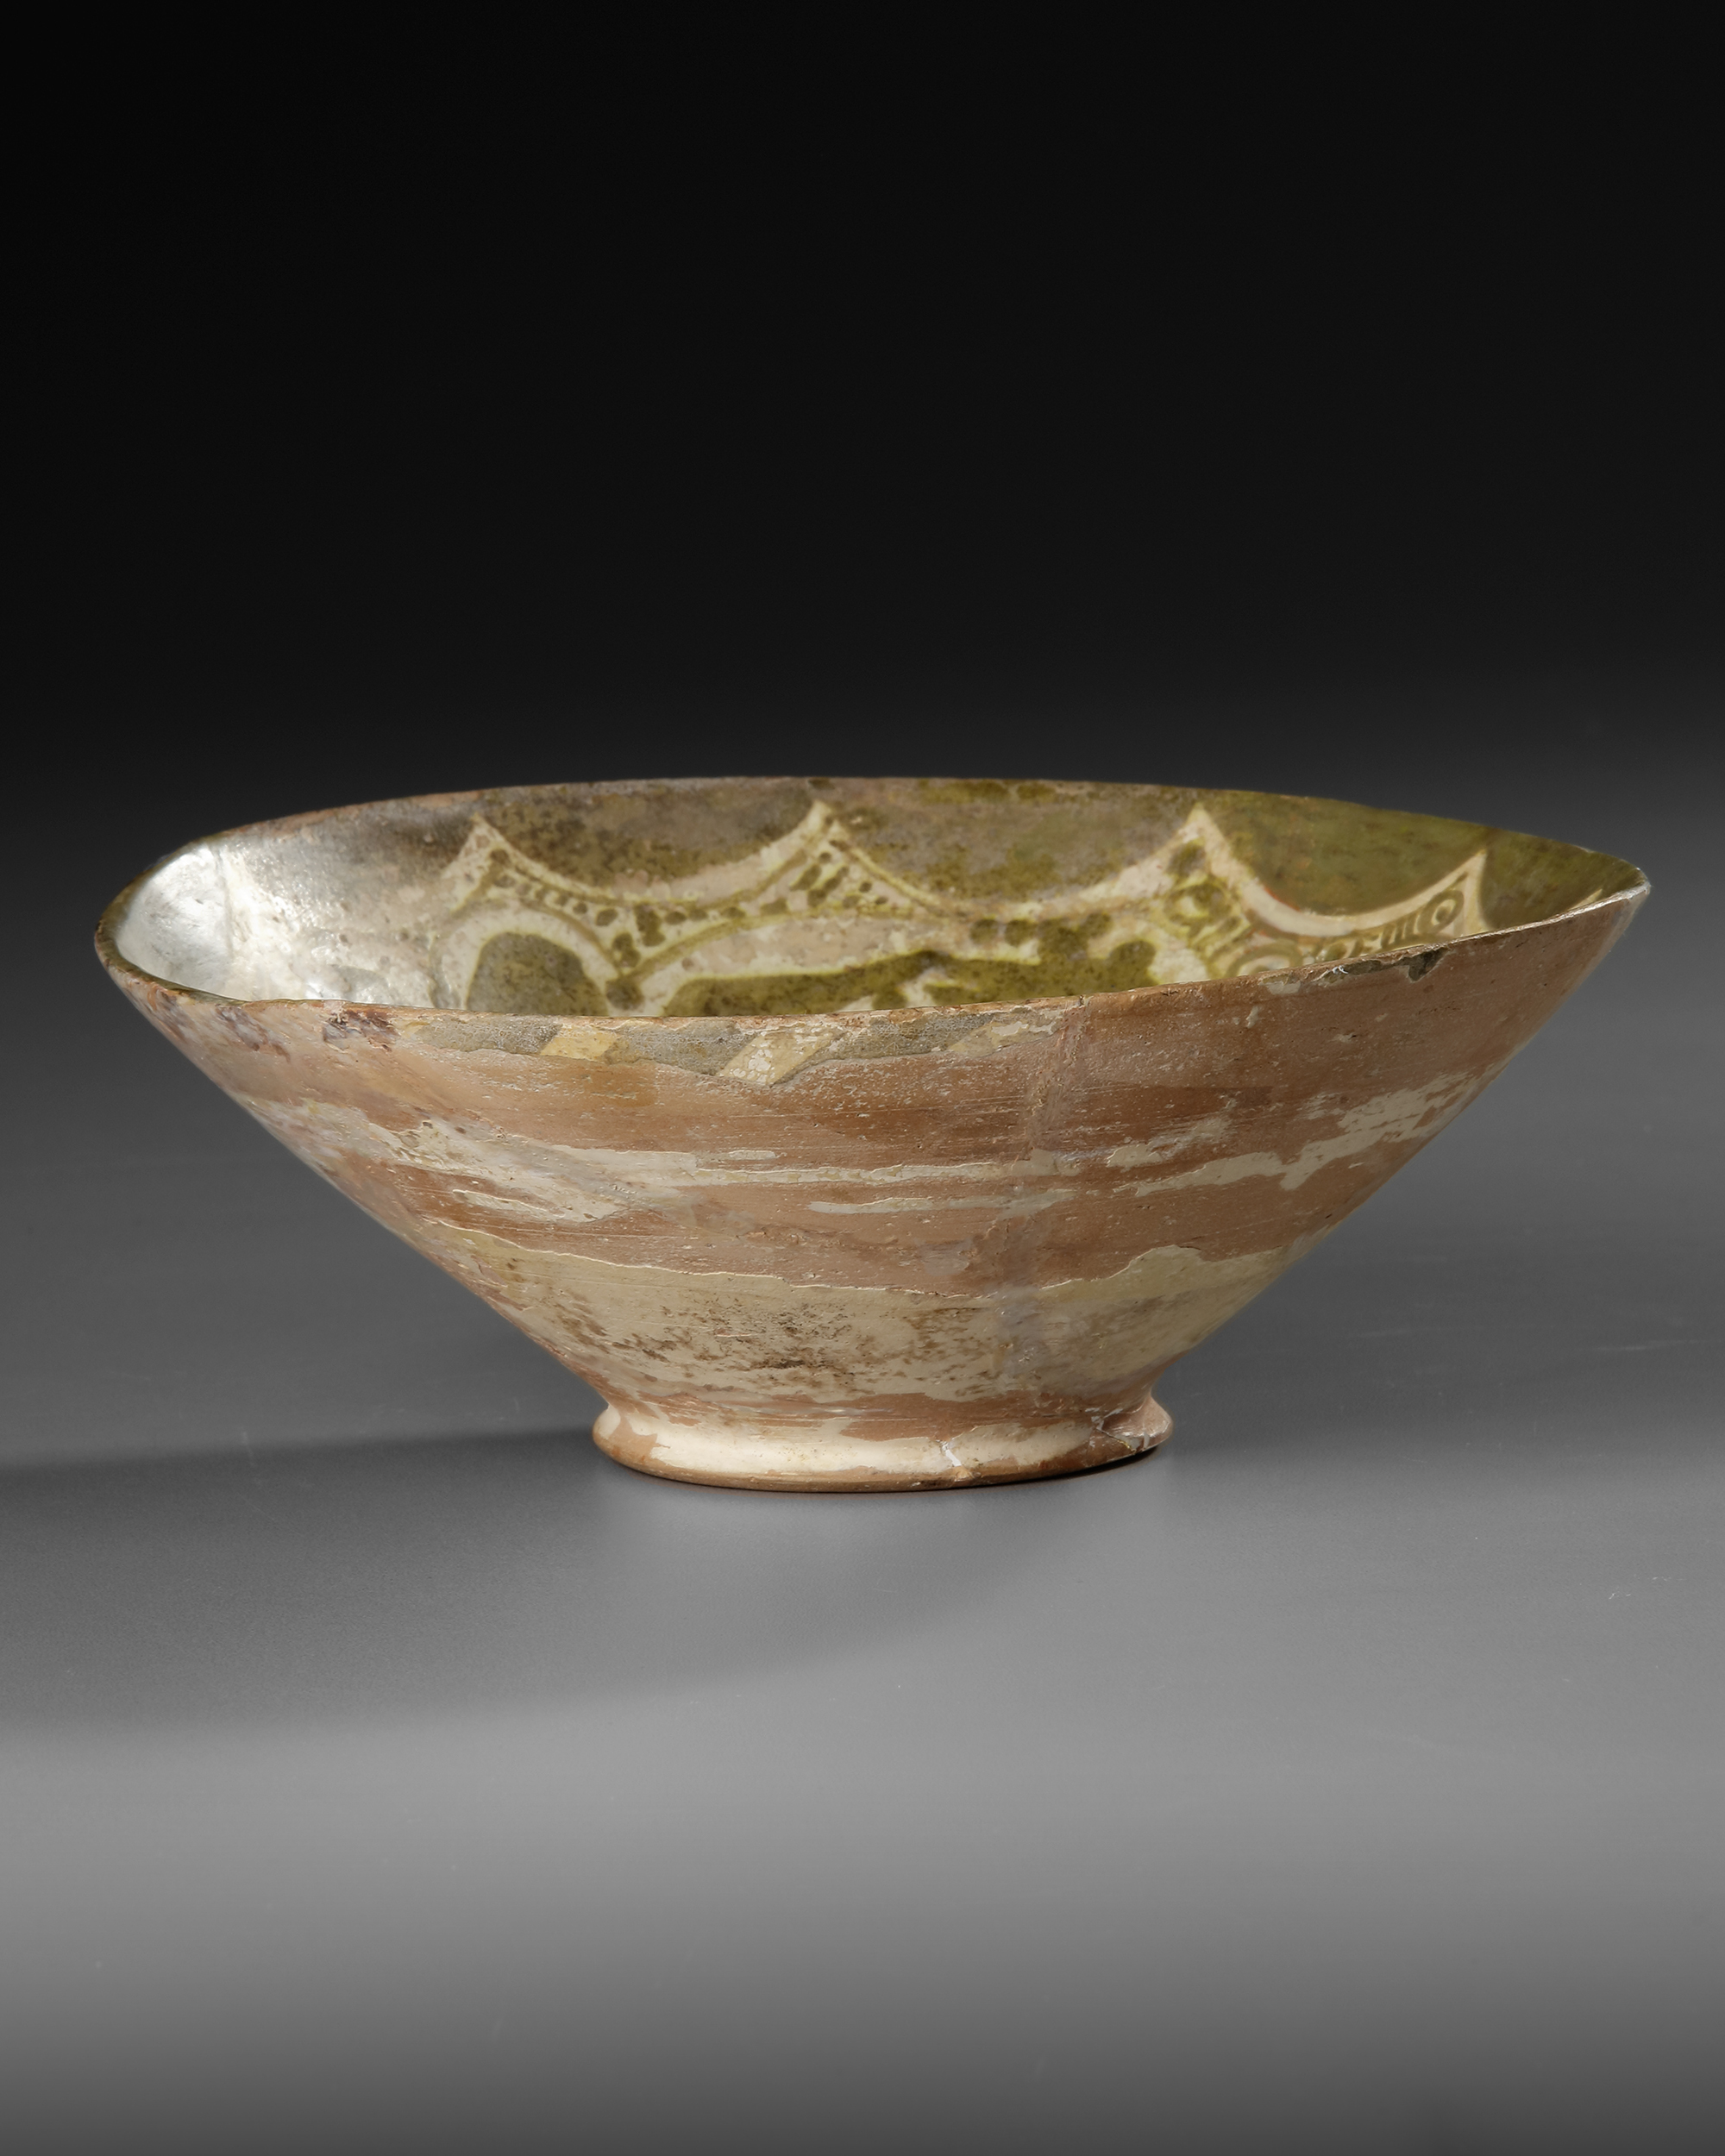 A NISHAPUR POTTERY BOWL, PERSIA, 10TH CENTURY - Image 6 of 10